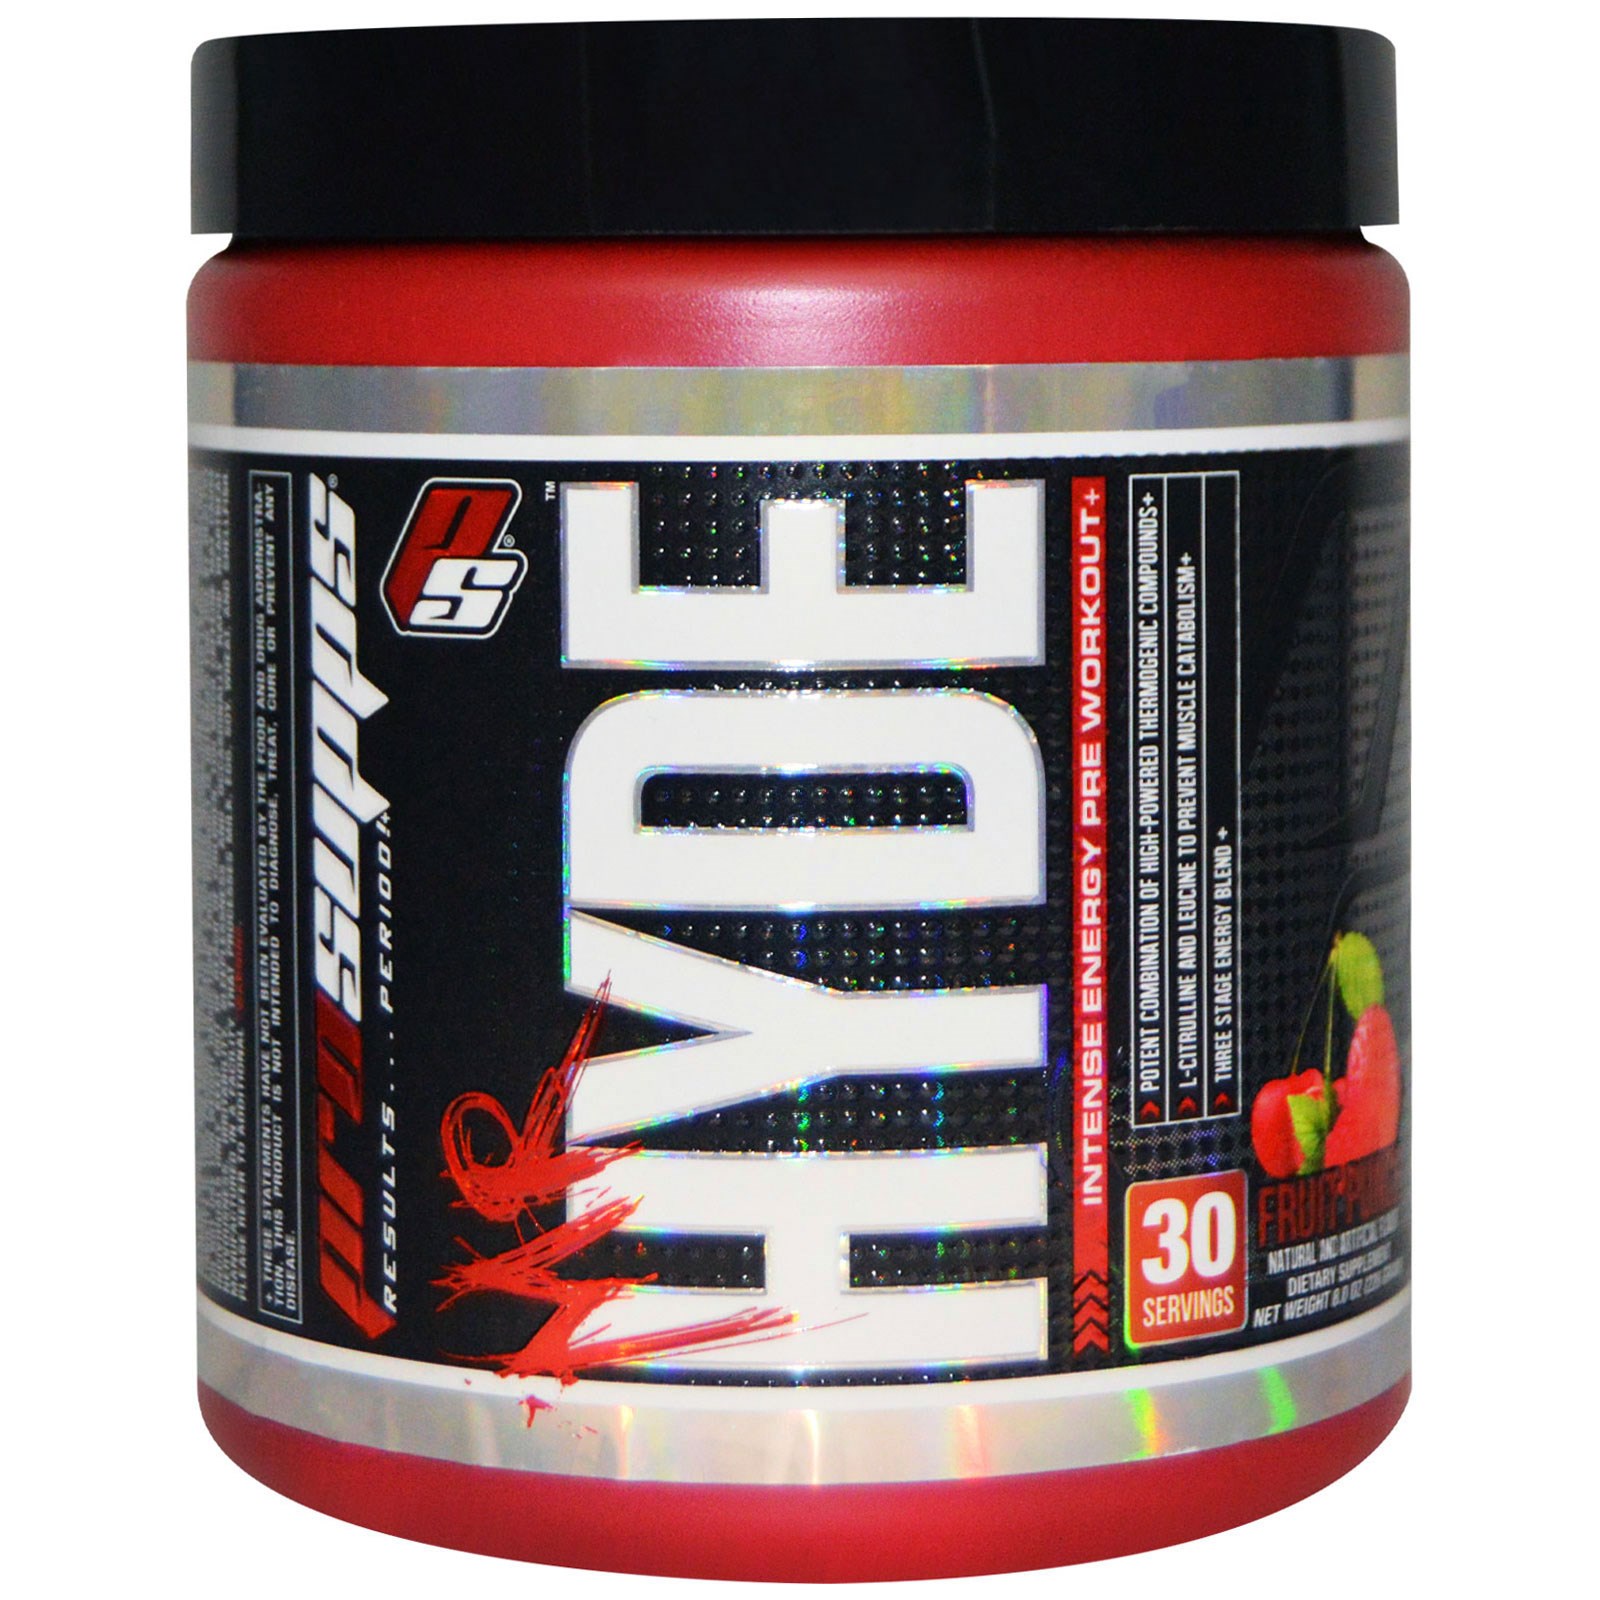 whats the best mr hyde flavor